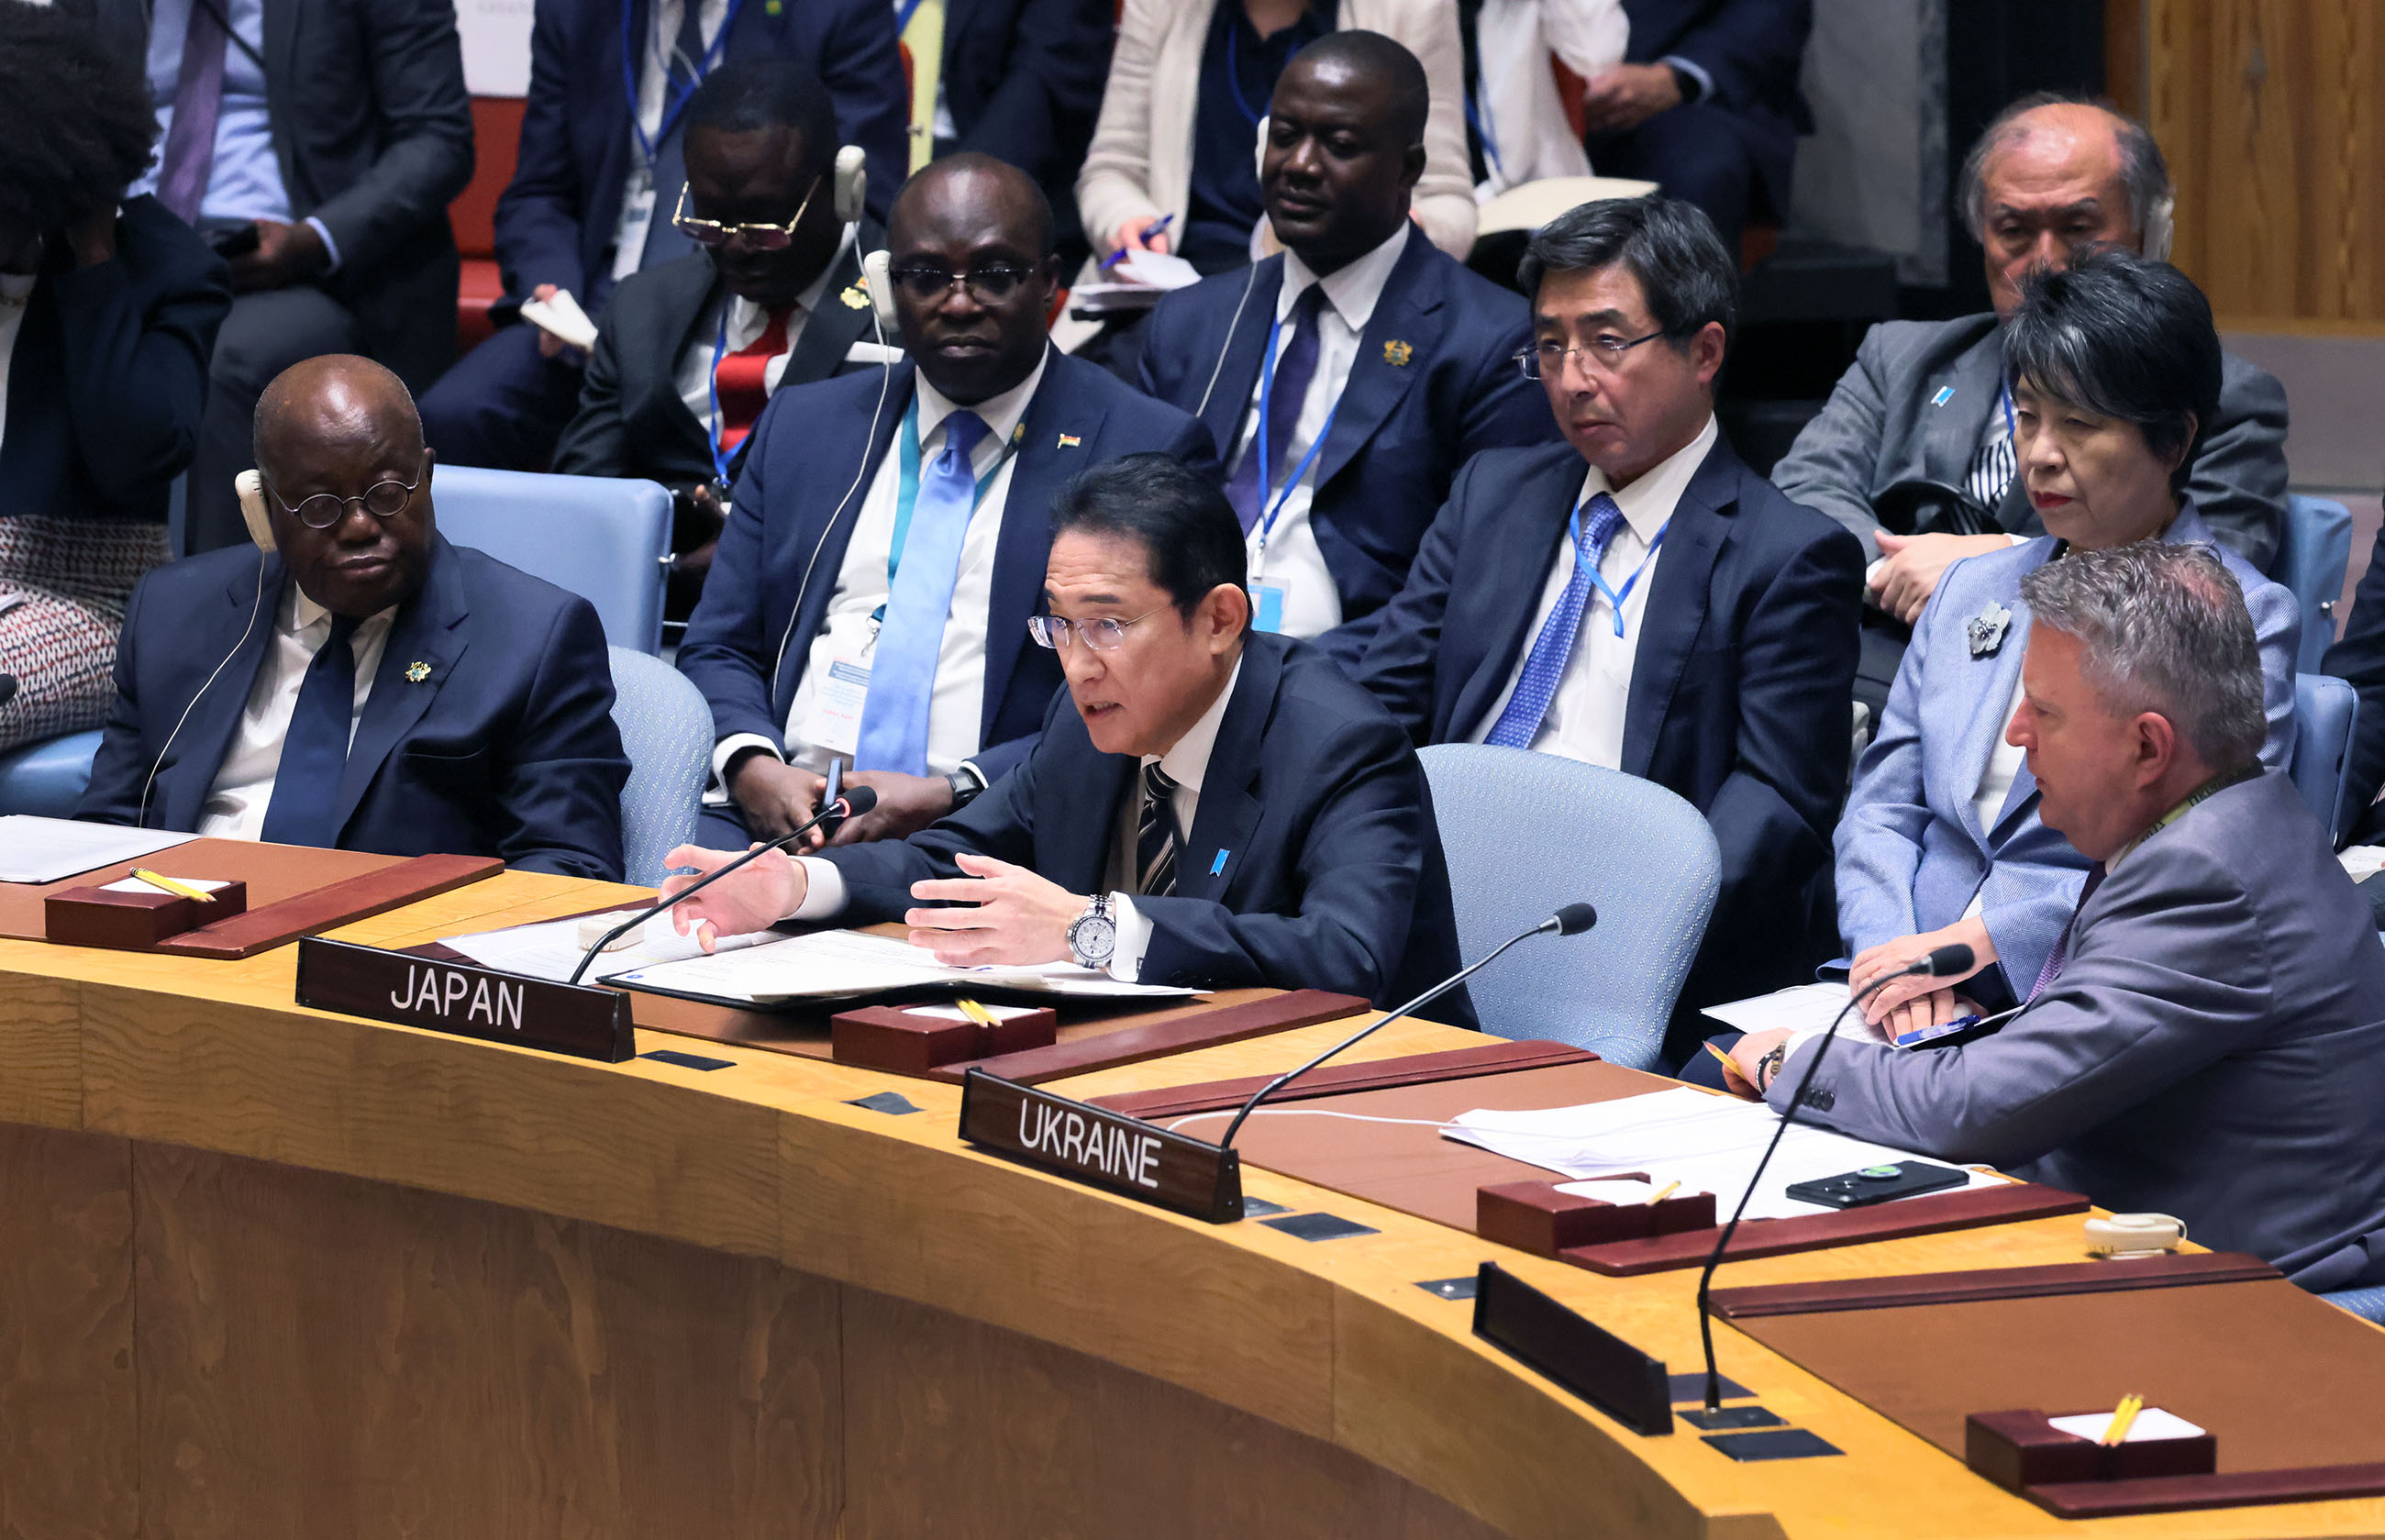 Prime Minister Kishida attending the Security Council High Level Open Debate on “Upholding the purposes and principles of the UN Charter through effective multilateralism: maintenance of peace and security of Ukraine” (4)